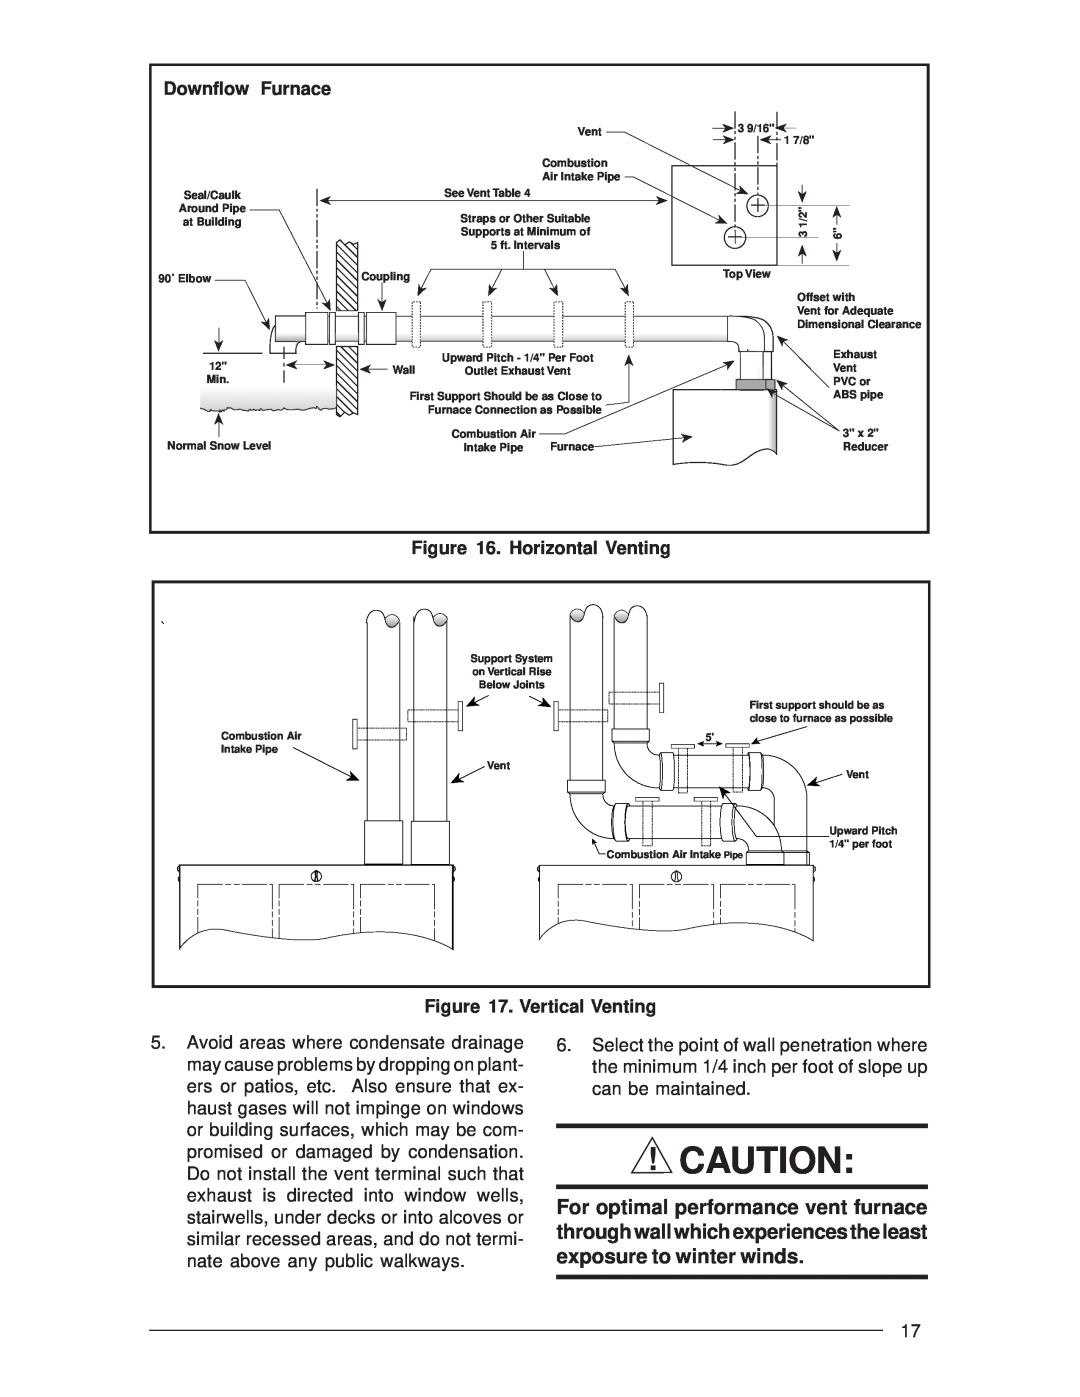 Nordyne M3RL Series installation instructions Downflow Furnace, Horizontal Venting, Vertical Venting 